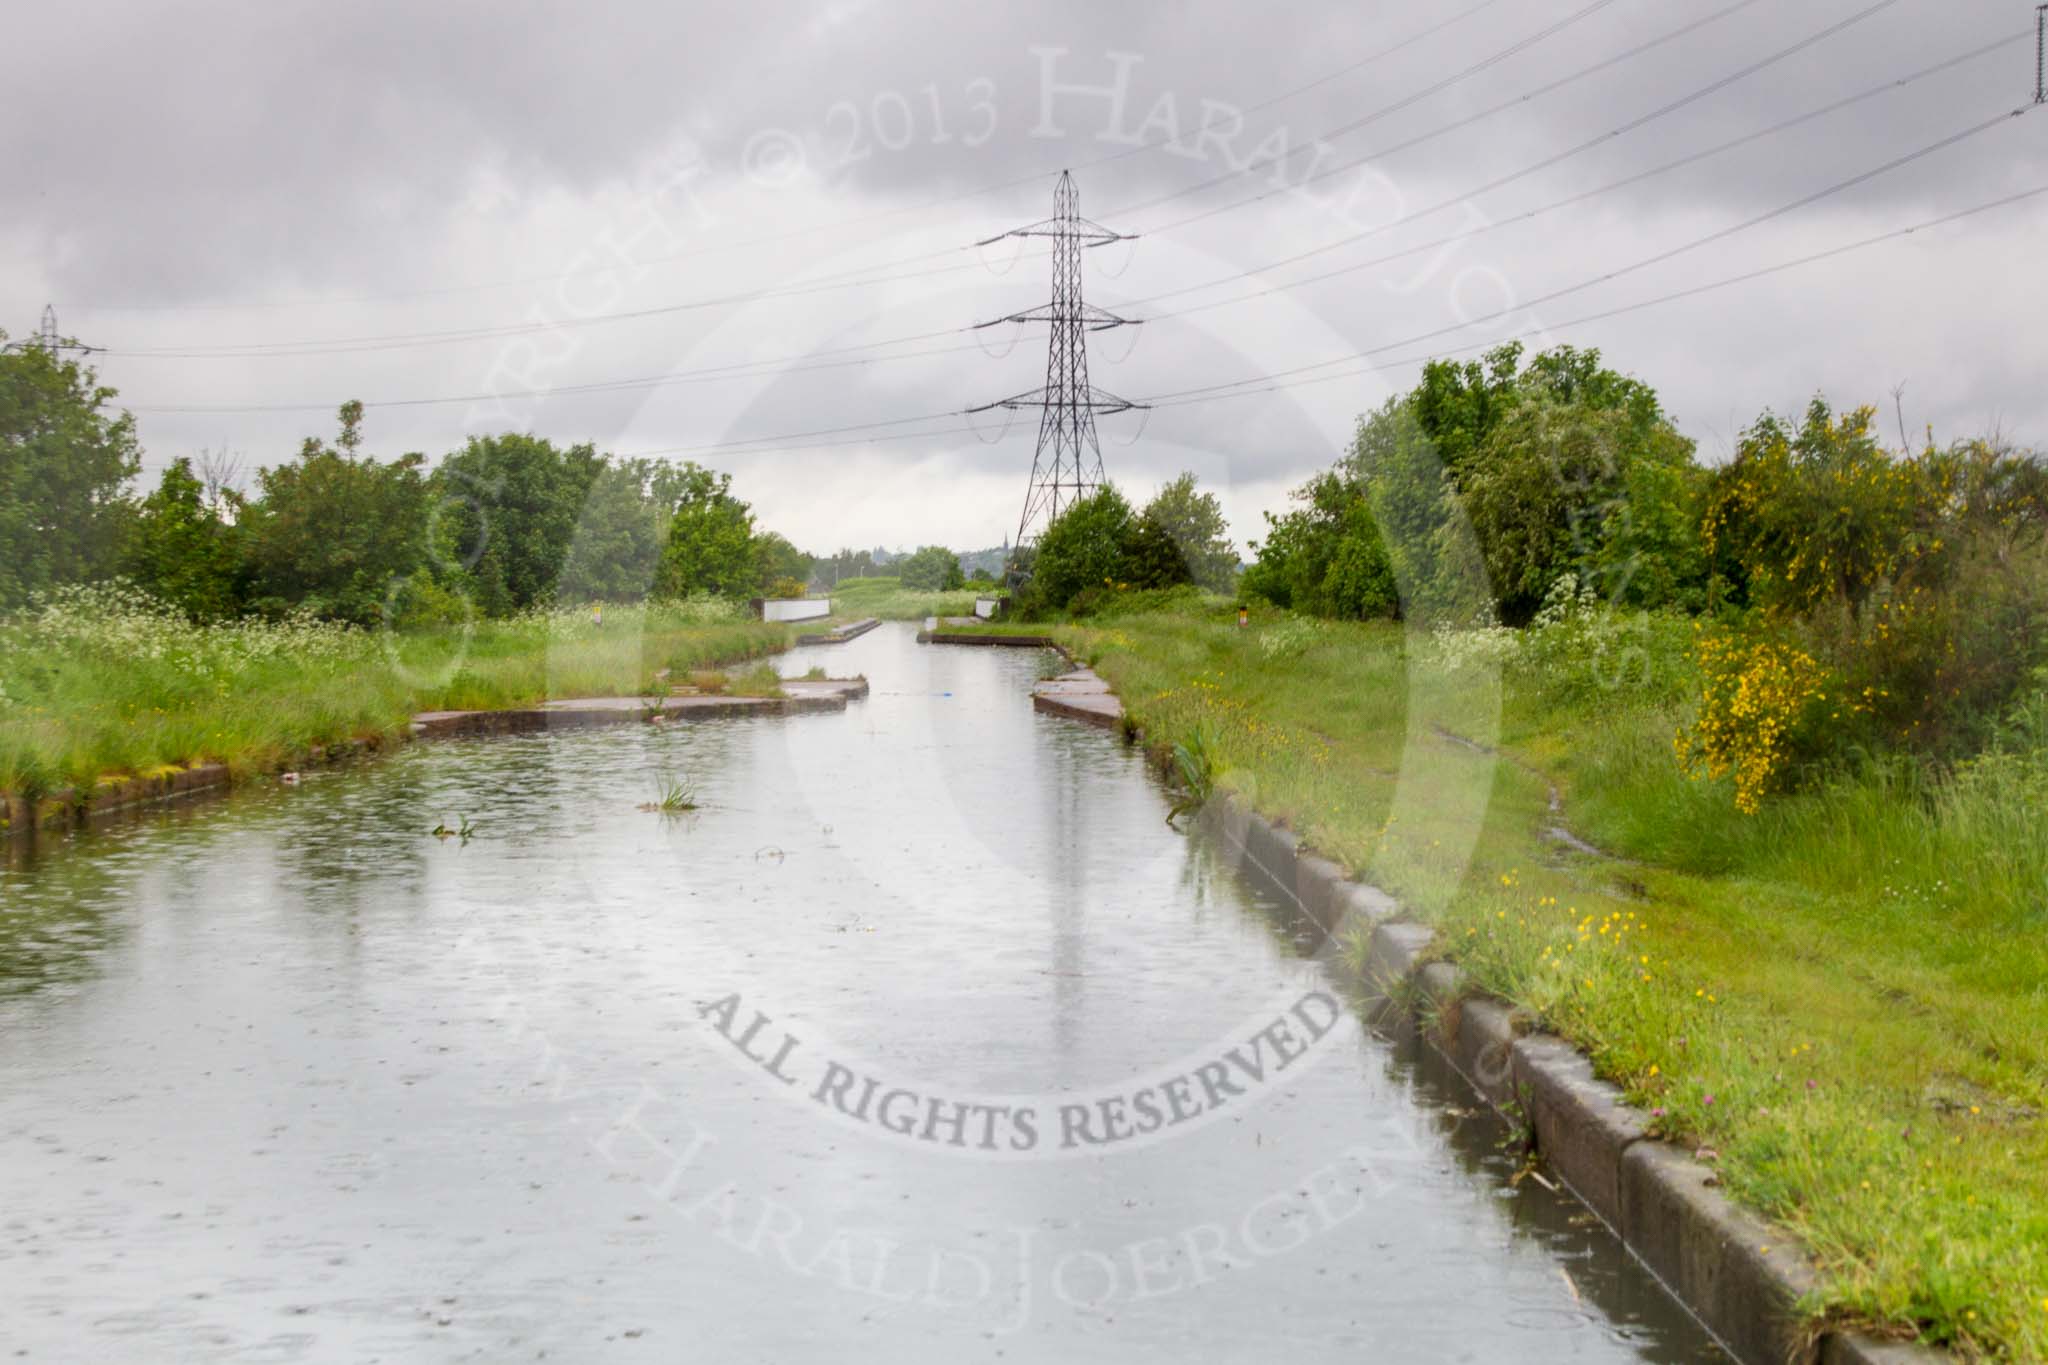 BCN Marathon Challenge 2014: Narrow area on the Tame Valley Canal before the concrete aqueduct over the M5 motorway. In case of a breach, the flow of water can be stopped at the narrow section..
Birmingham Canal Navigation,


United Kingdom,
on 24 May 2014 at 15:05, image #141